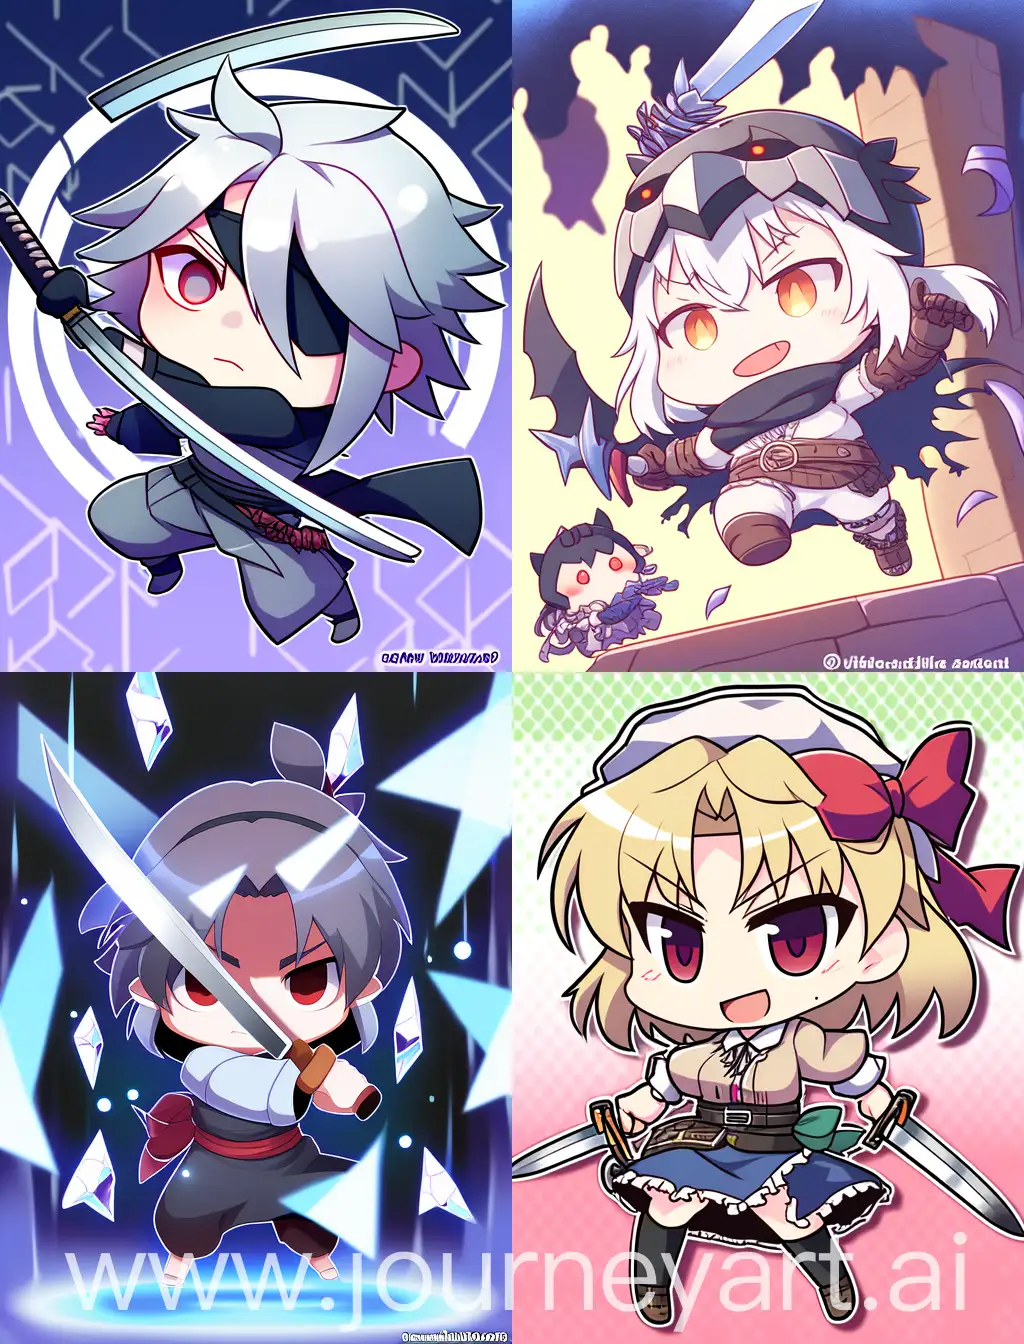 chibi bandits holding knife, with abstract background